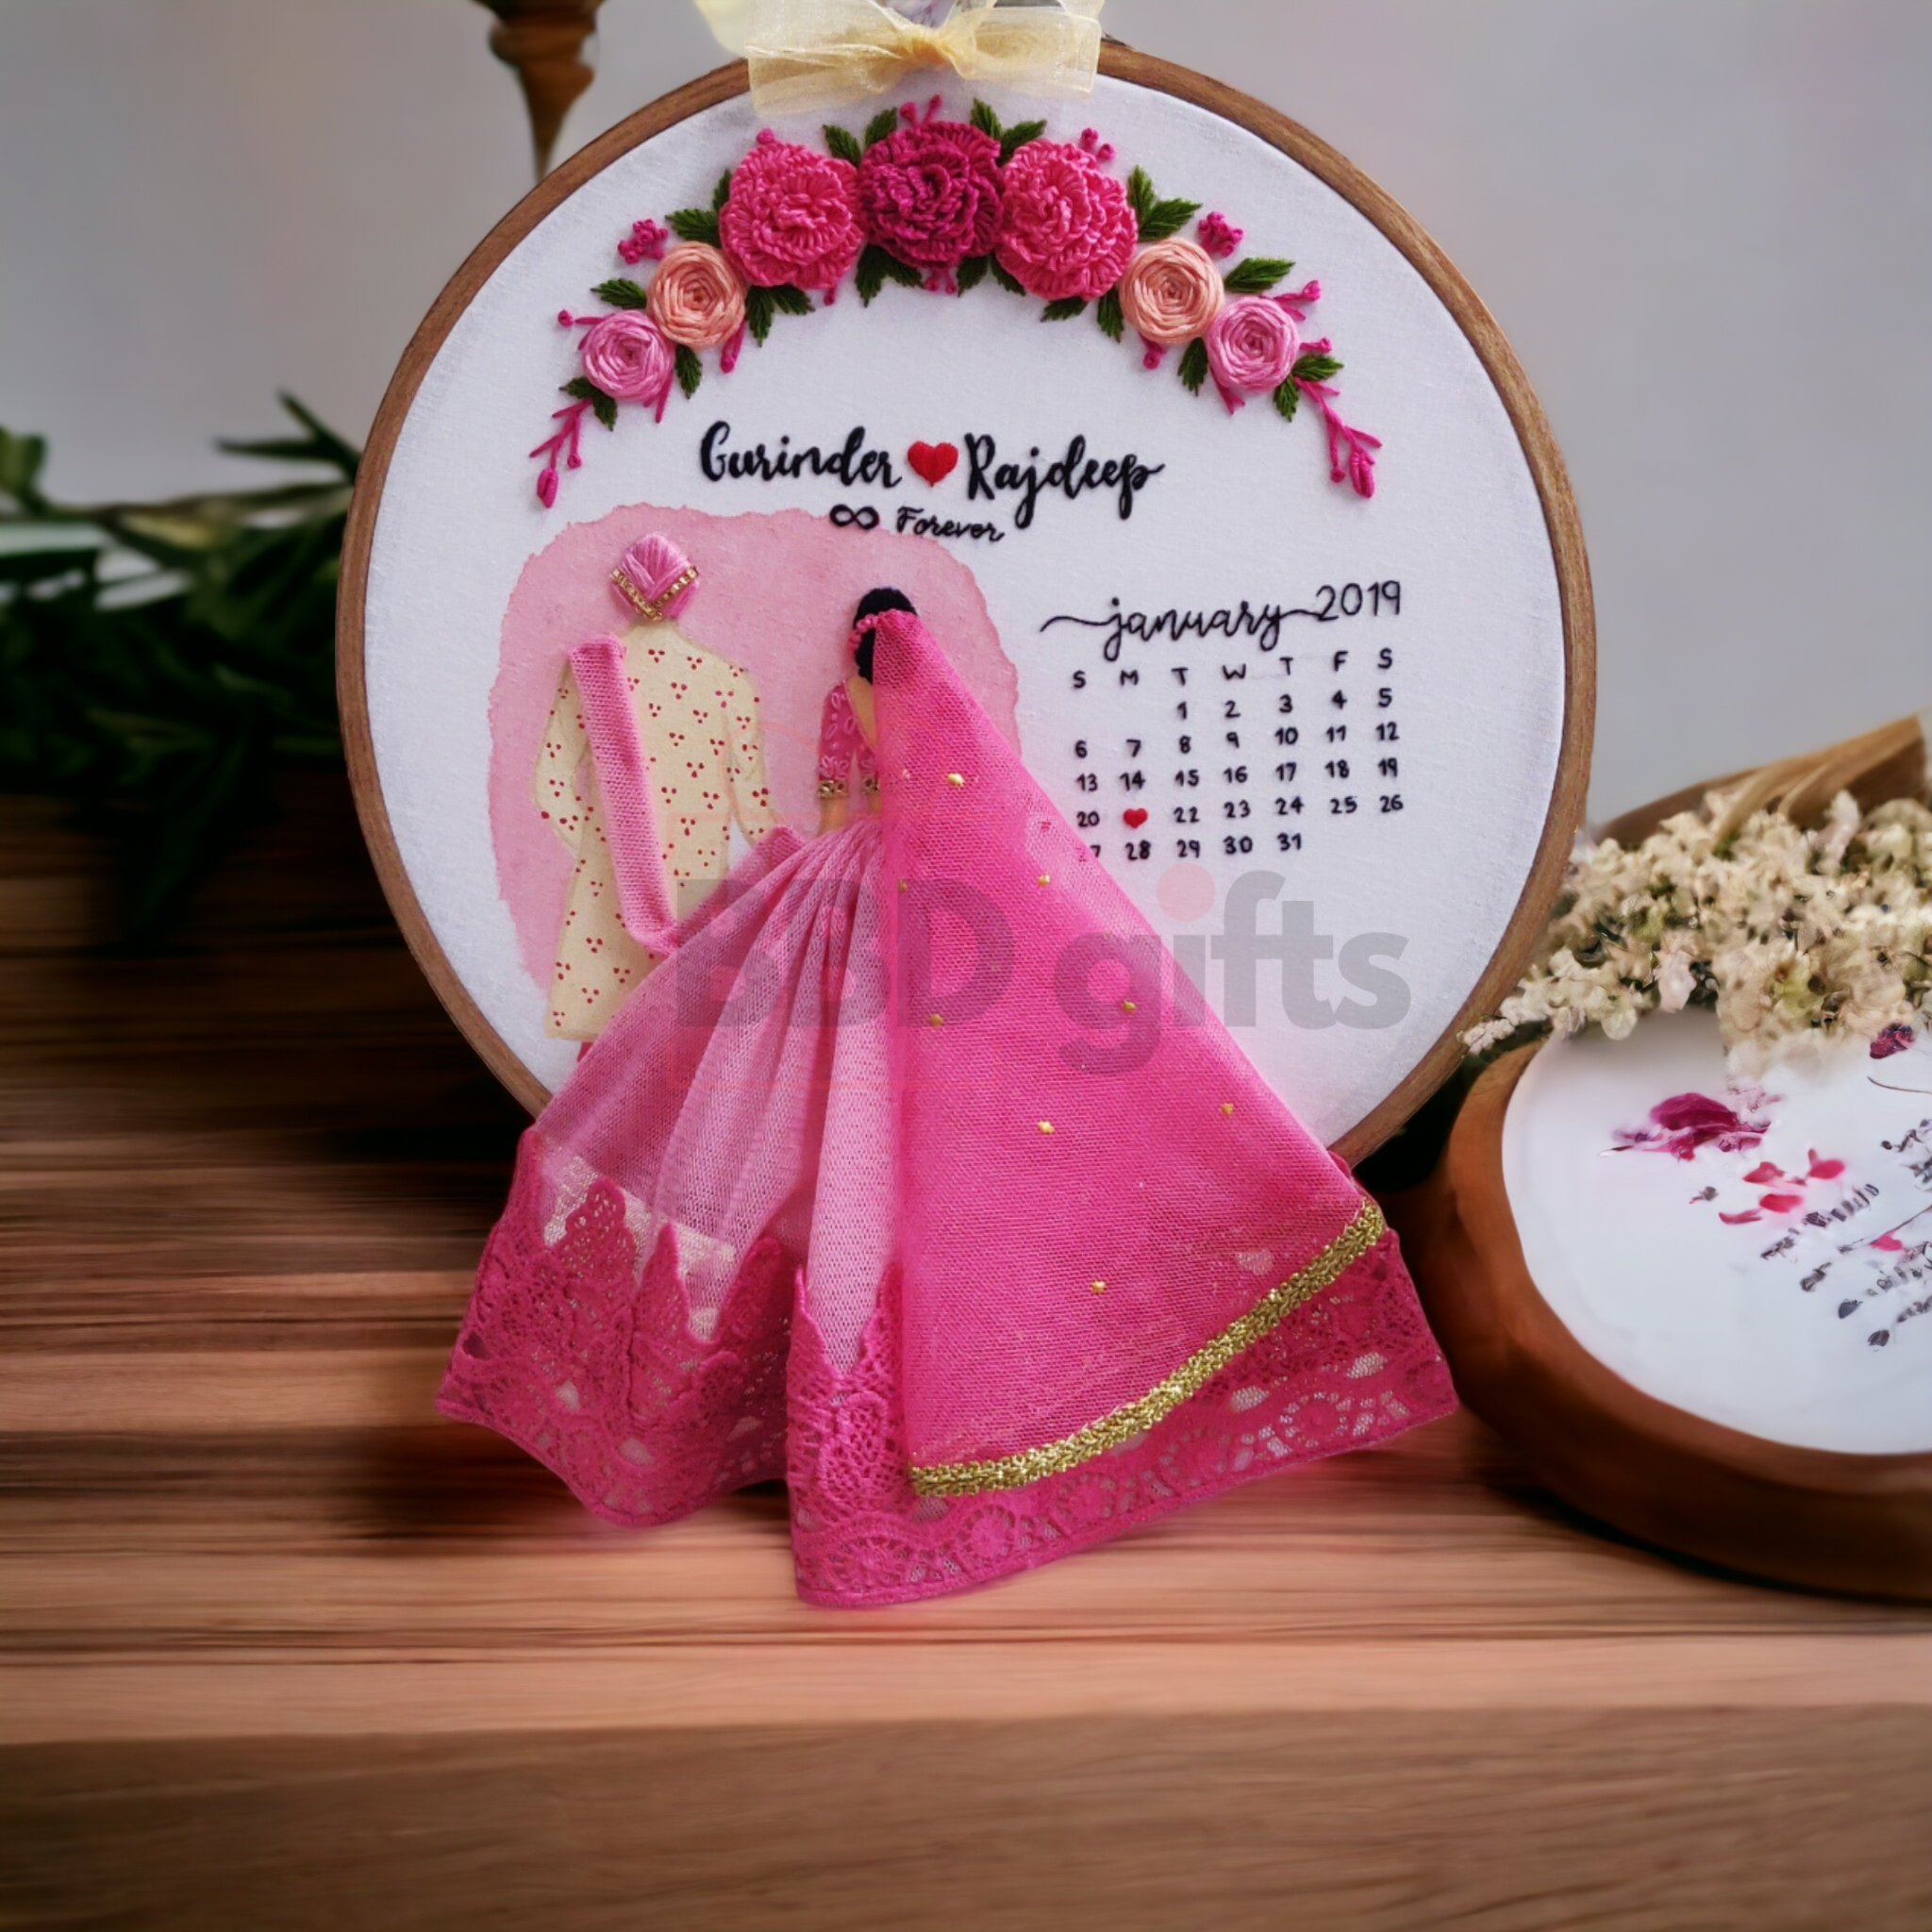 Customizable Bride & Groom Calendar embroidery Hoop | Personalized embroidery hoops | Anniversary Gift | Gift For Couples